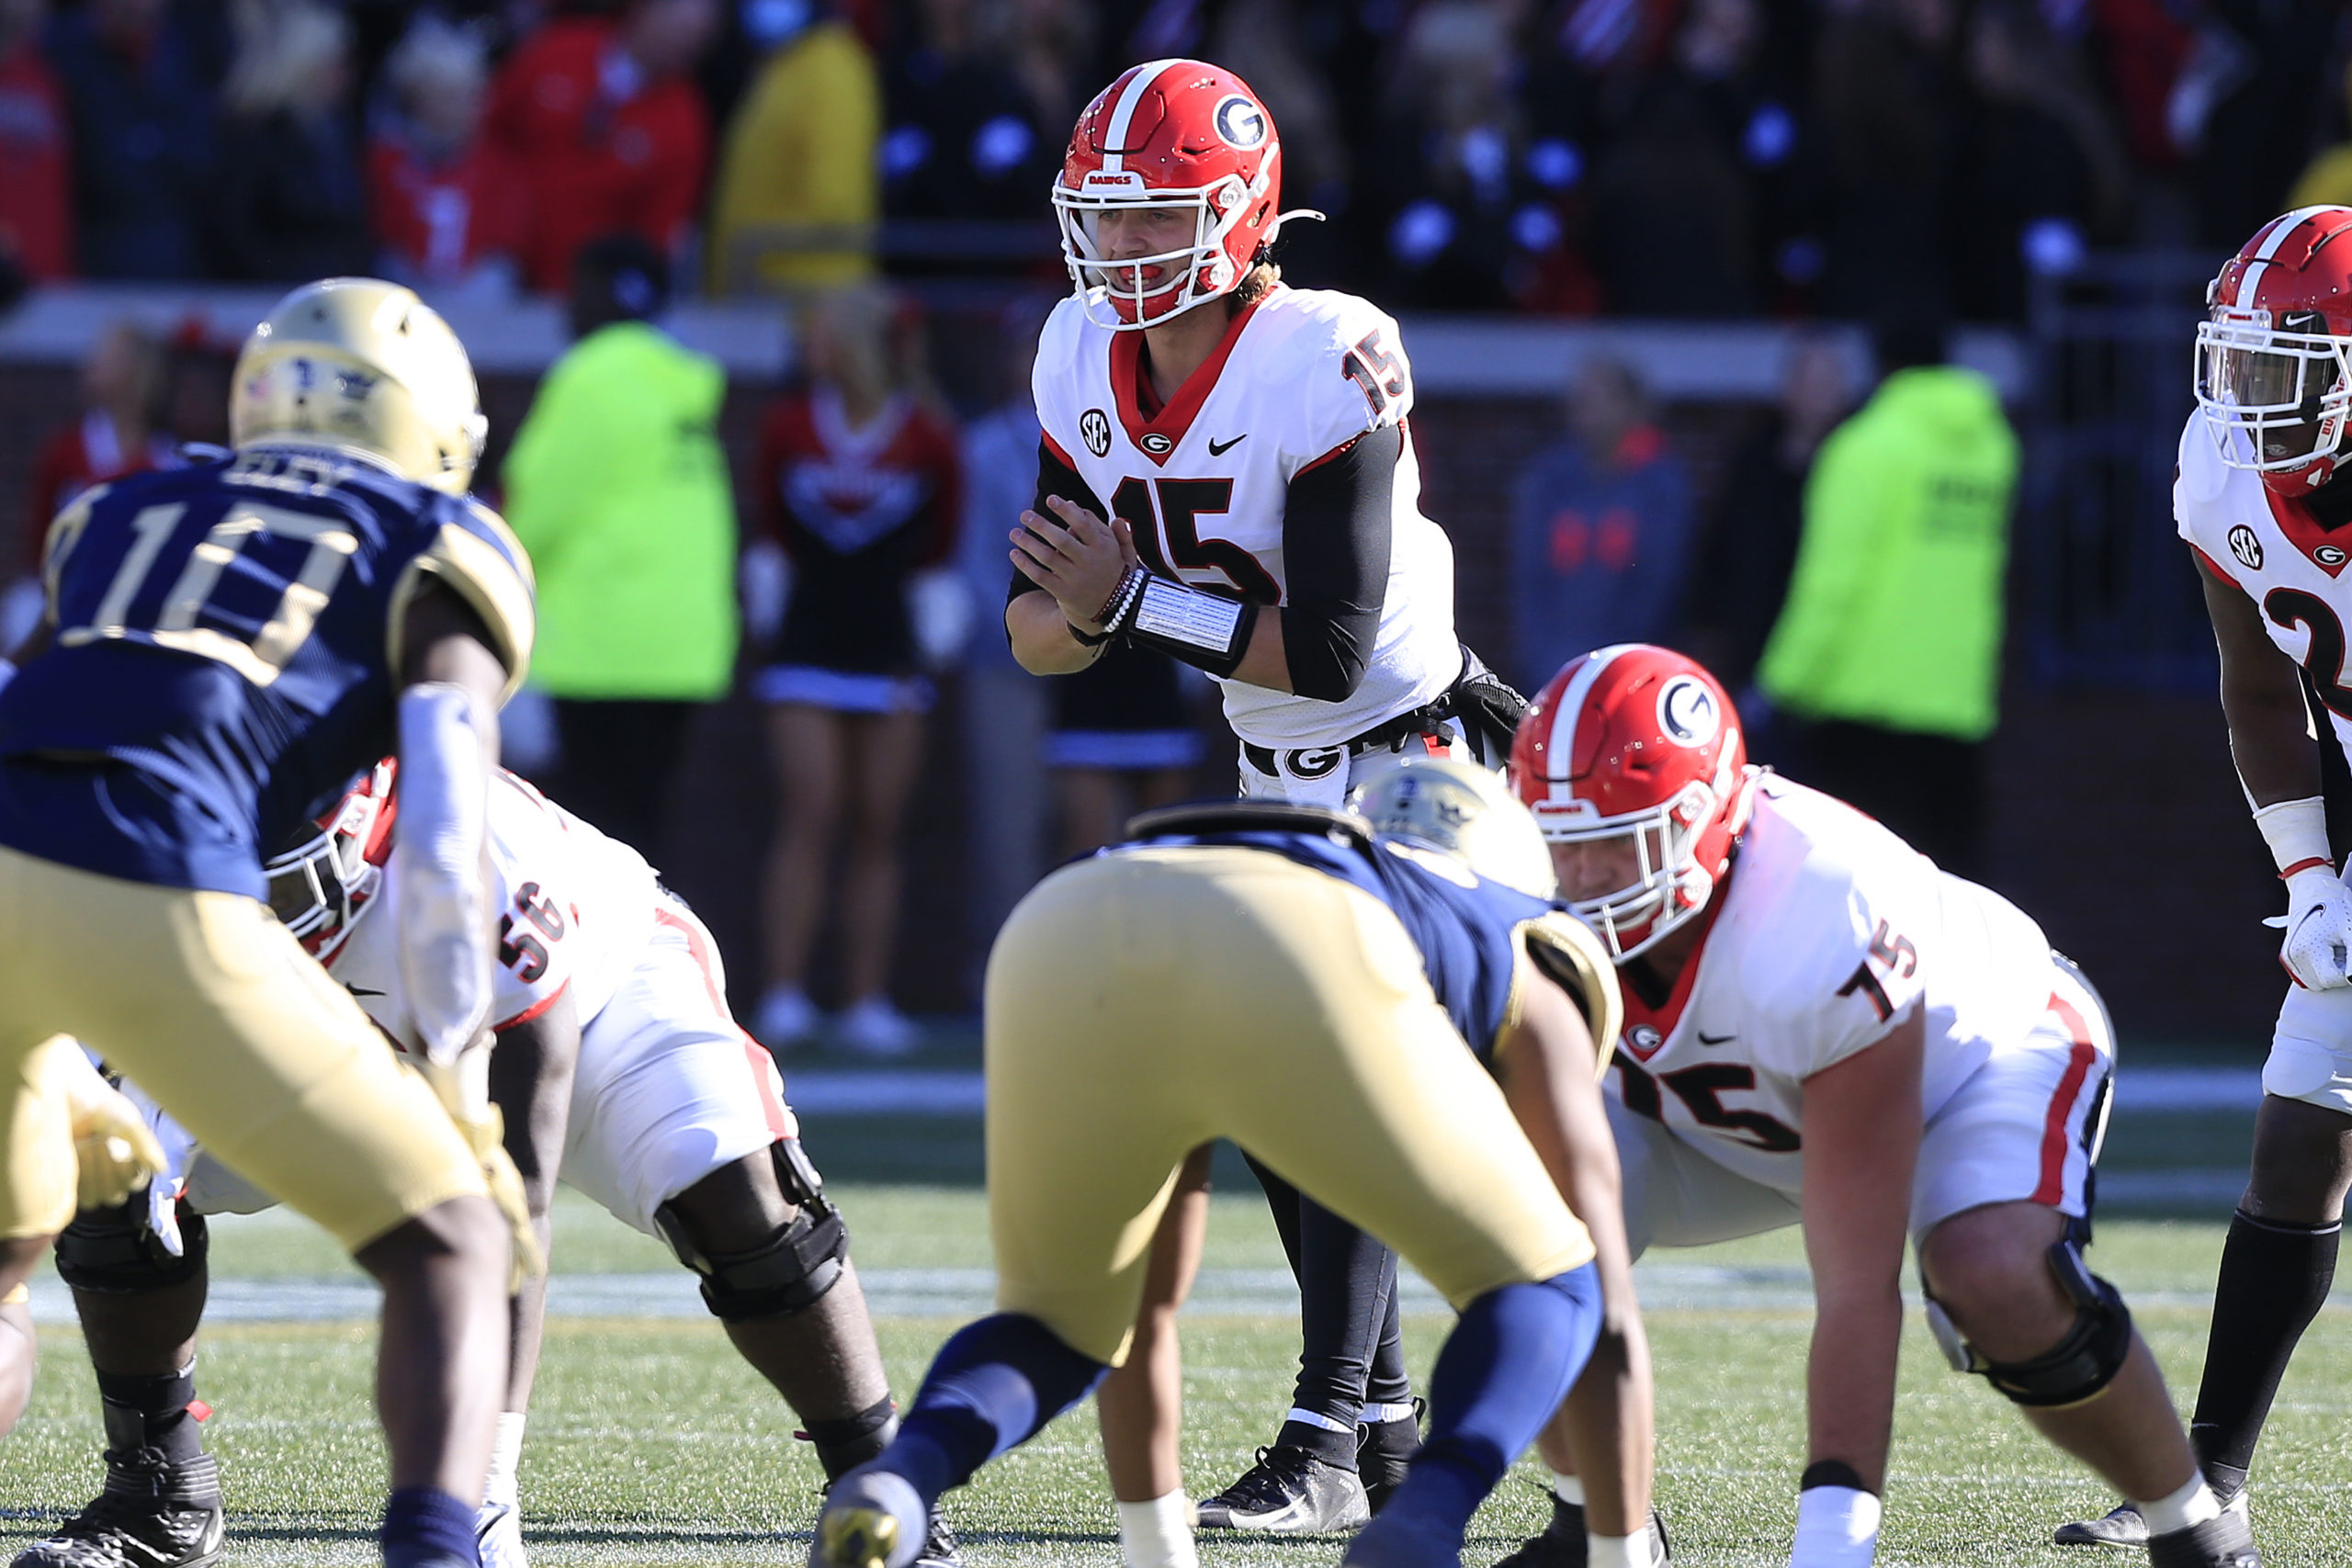 ATLANTA, GA - NOVEMBER 27: Quarterback Carson Beck #15 of the Georgia Bulldogs barks out the signals during the college football game between the Georgia Tech Yellow Jackets and the University of Georgia Bulldogs on November 27, 2021 at Bobby Dodd Stadium in Atlanta, GA.  (Photo by David J. Griffin/Icon Sportswire via Getty Images)